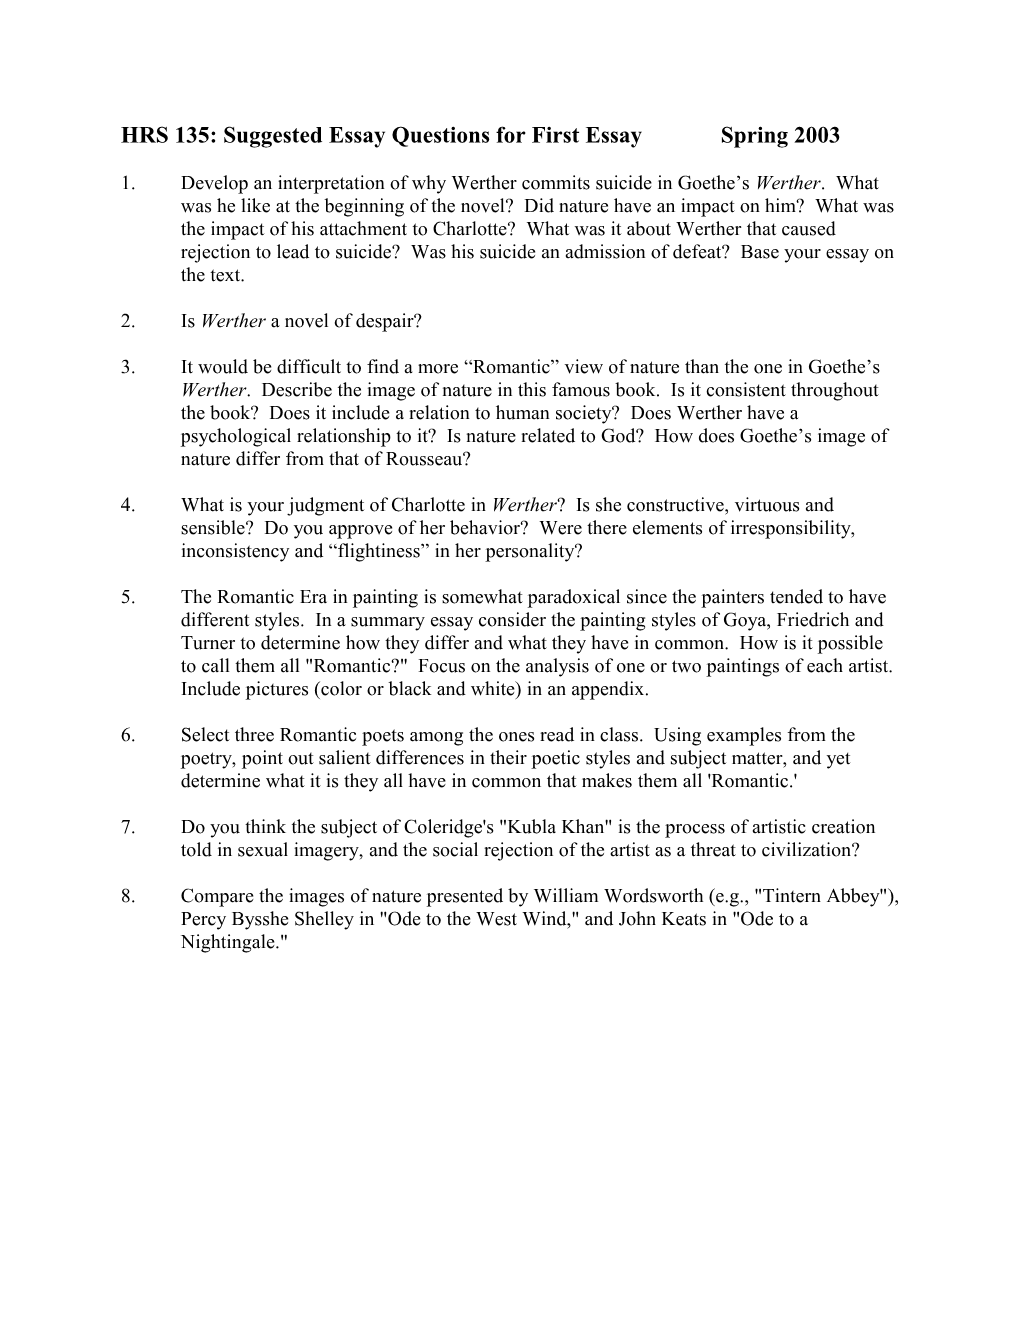 Humanities 155 Suggested Questions for Essay #1